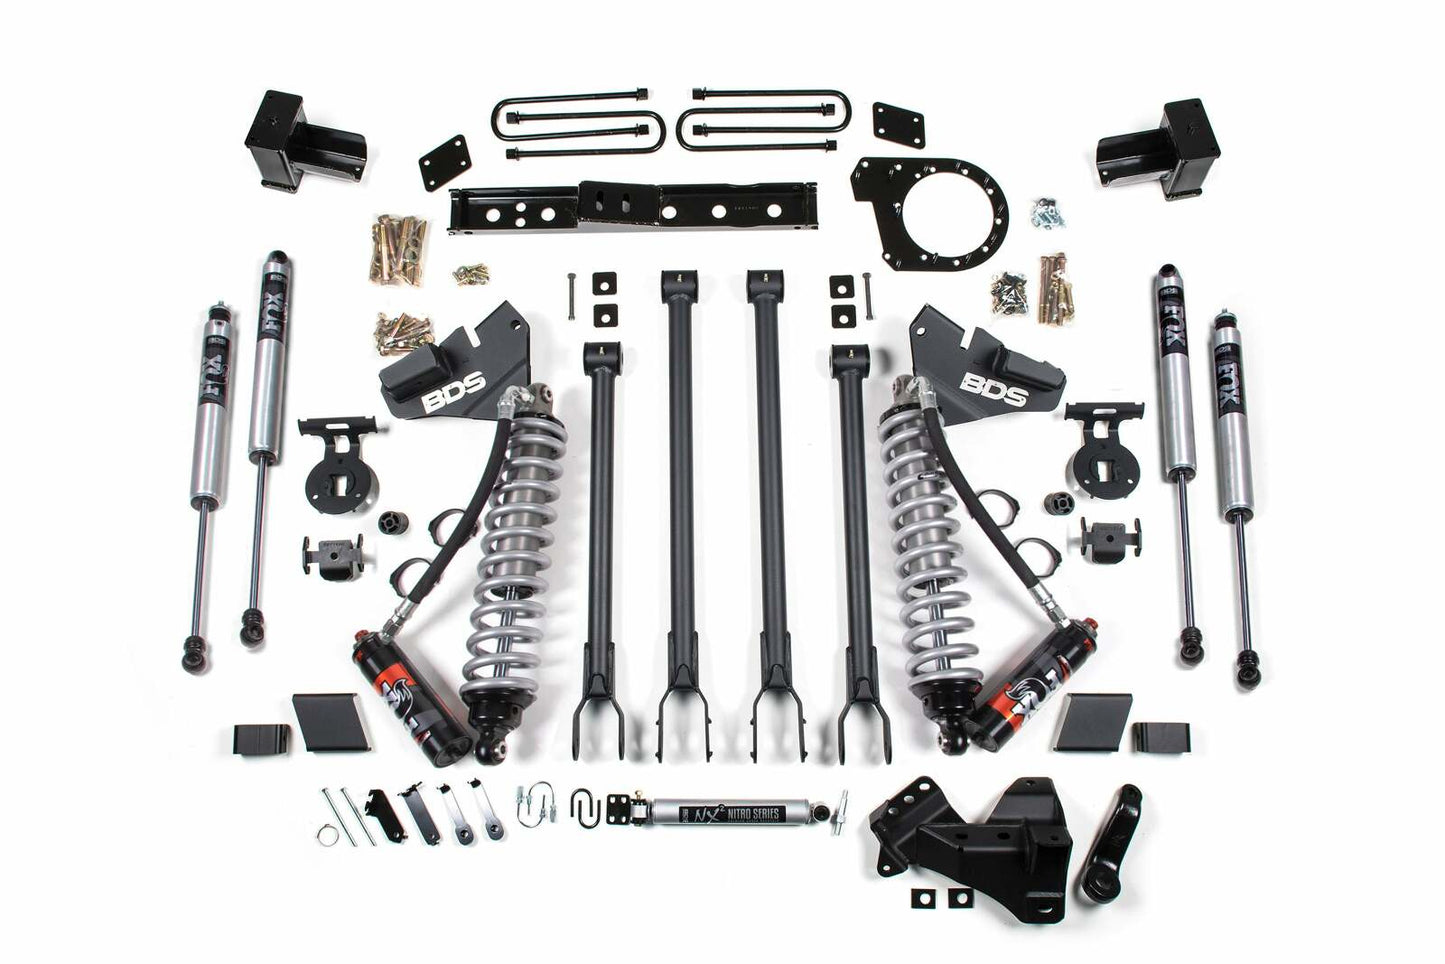 2020-2022 Ford F250/F350 4wd 7" 4-Link Suspension Lift Kit, 6" Rear, Spring, Diesel - Fox 2.5 PES C/O Front, Fox 2.5 PES Aux Front, Fox 2.5 PES Rear